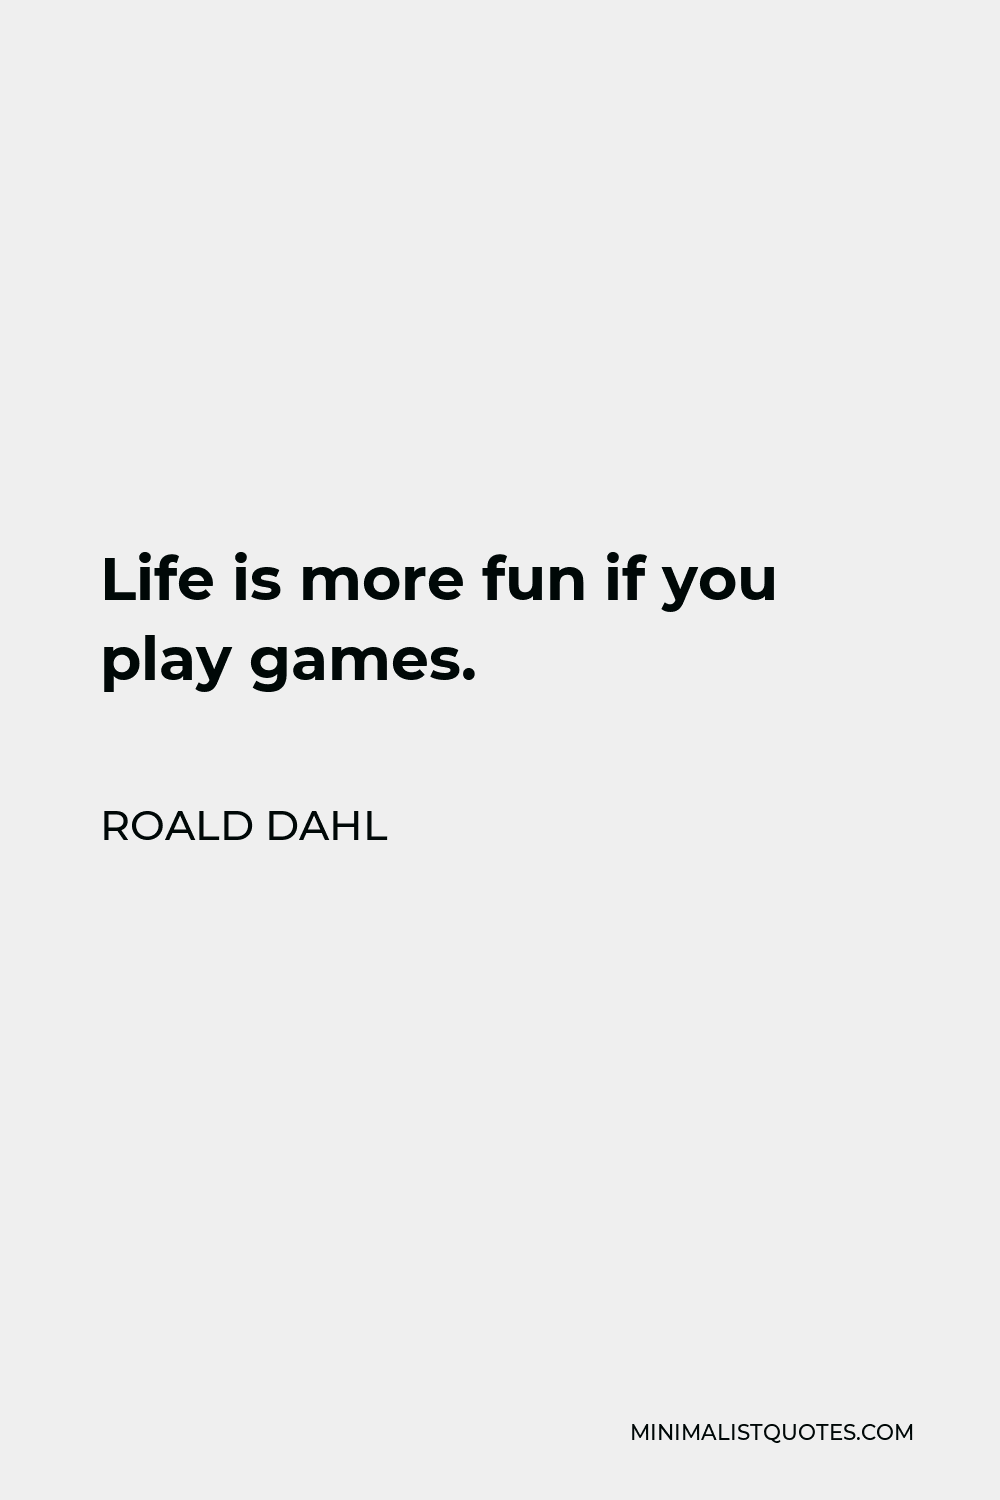 Roald Dahl Quote: “Life is more fun if you play games.”